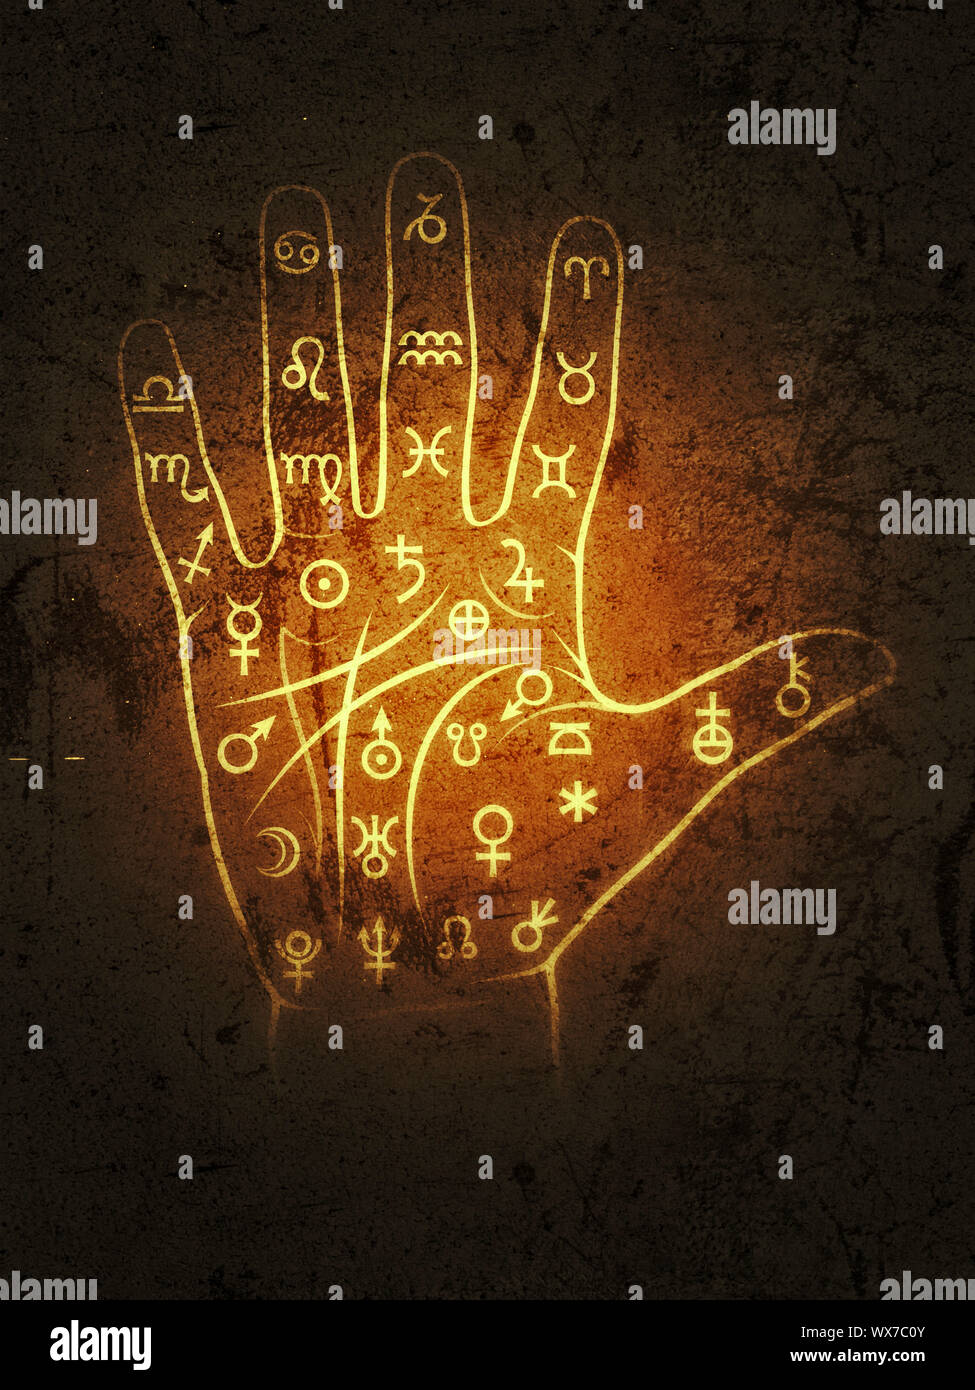 Chiromancy And Palmistry (Chart with signs and symbols) Stock Photo